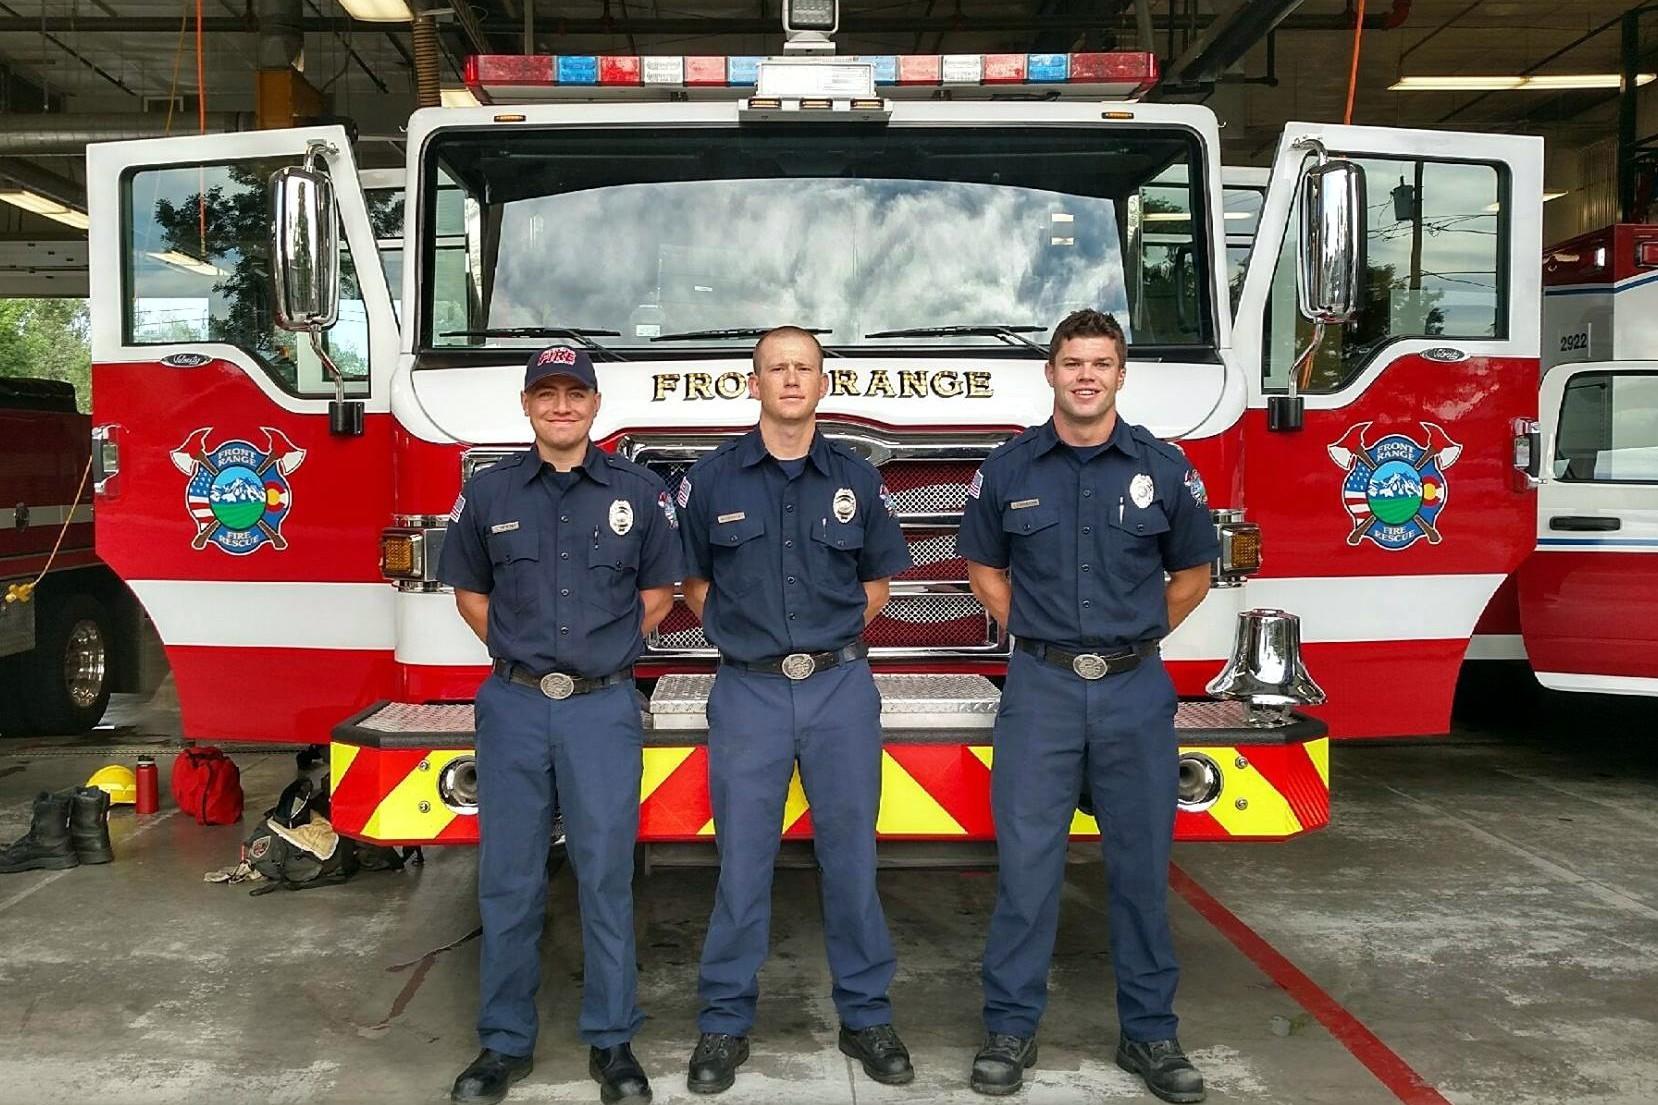 Firefighter Wright, Firefighter Geisick, and Firefighter Stephenson Standing in Front of Firetruck